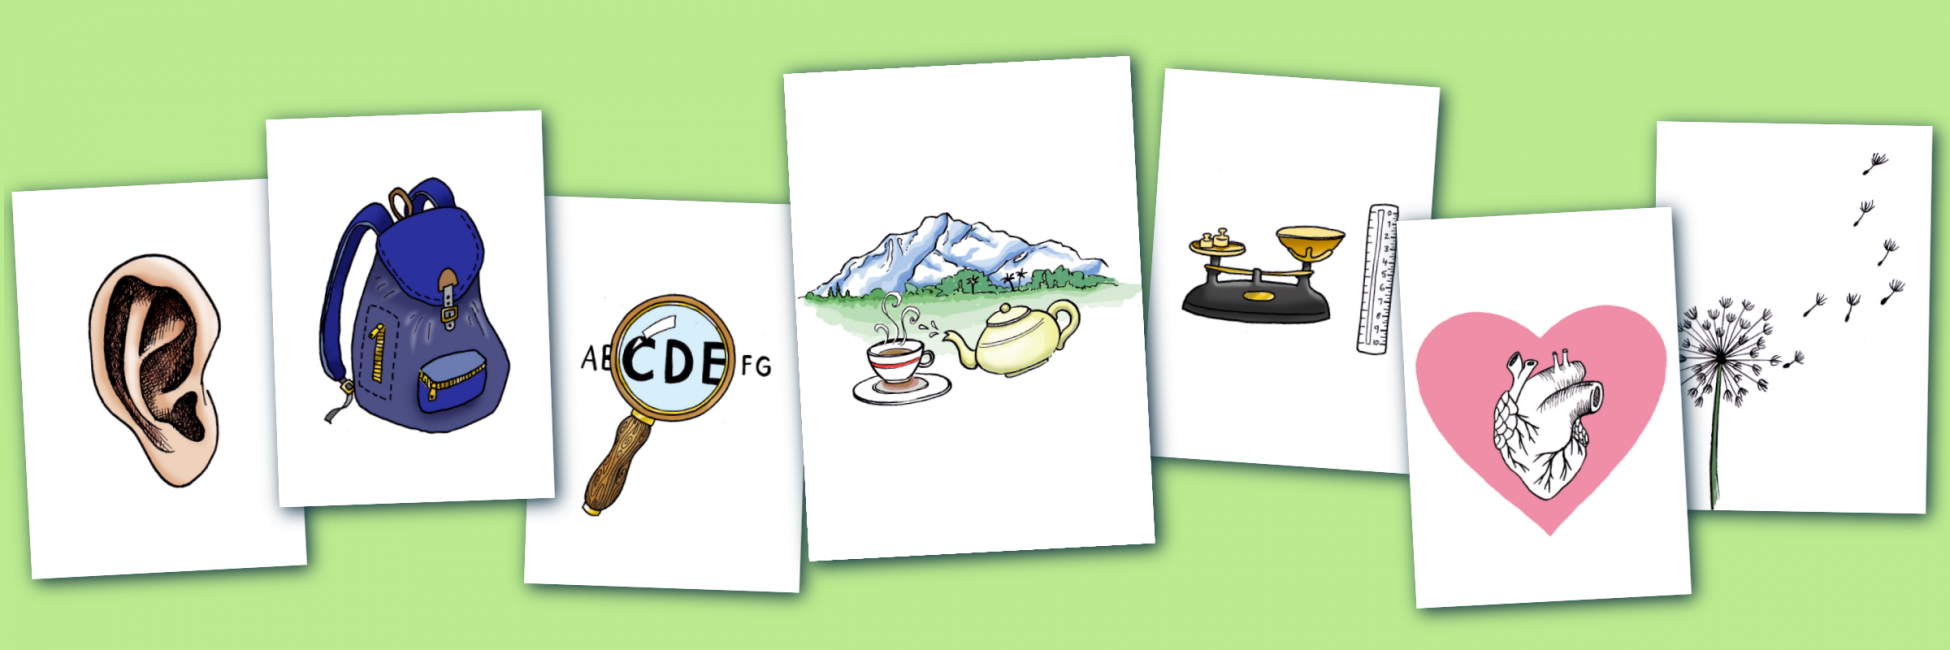 A set of 7 cards with hand-drawn illustrations on them. The largest in the centre has a drawing of a teapot and a cup of tea in the foreground and a mountain in the background